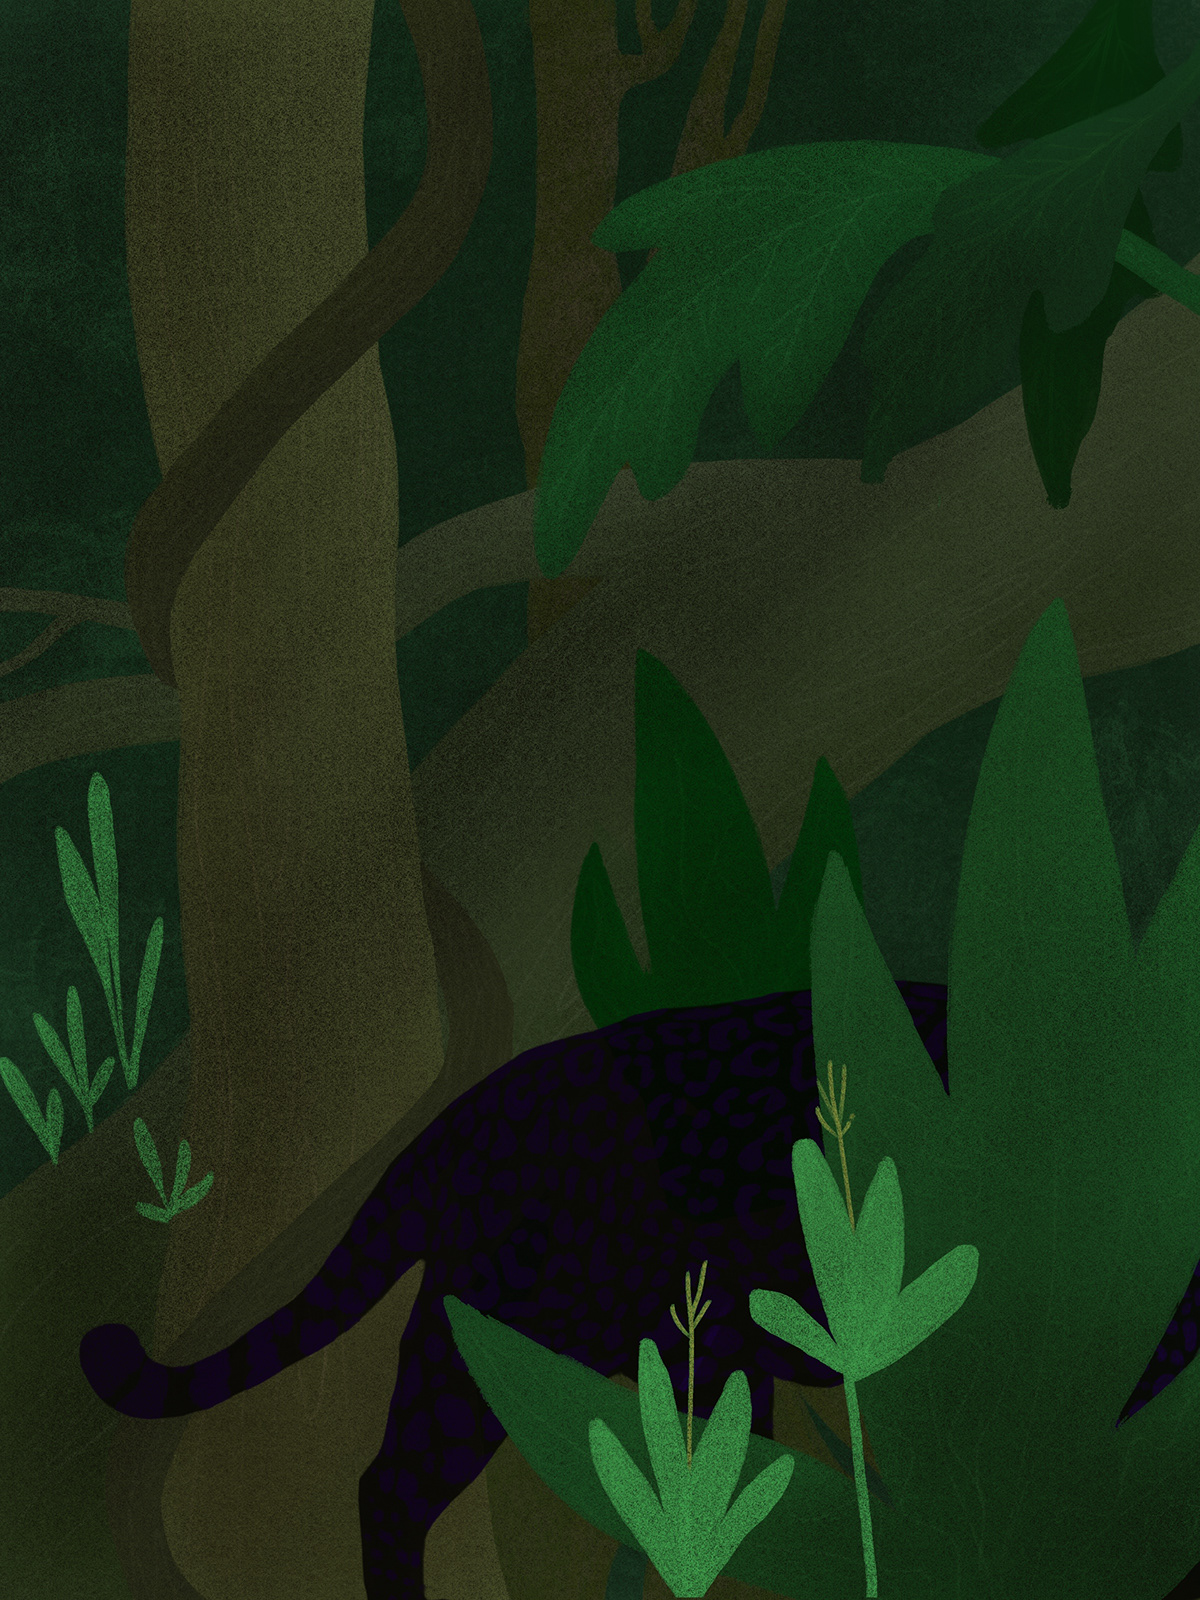 ILLUSTRATION  Procreate digital imagination Drawing  forest animals mysterious